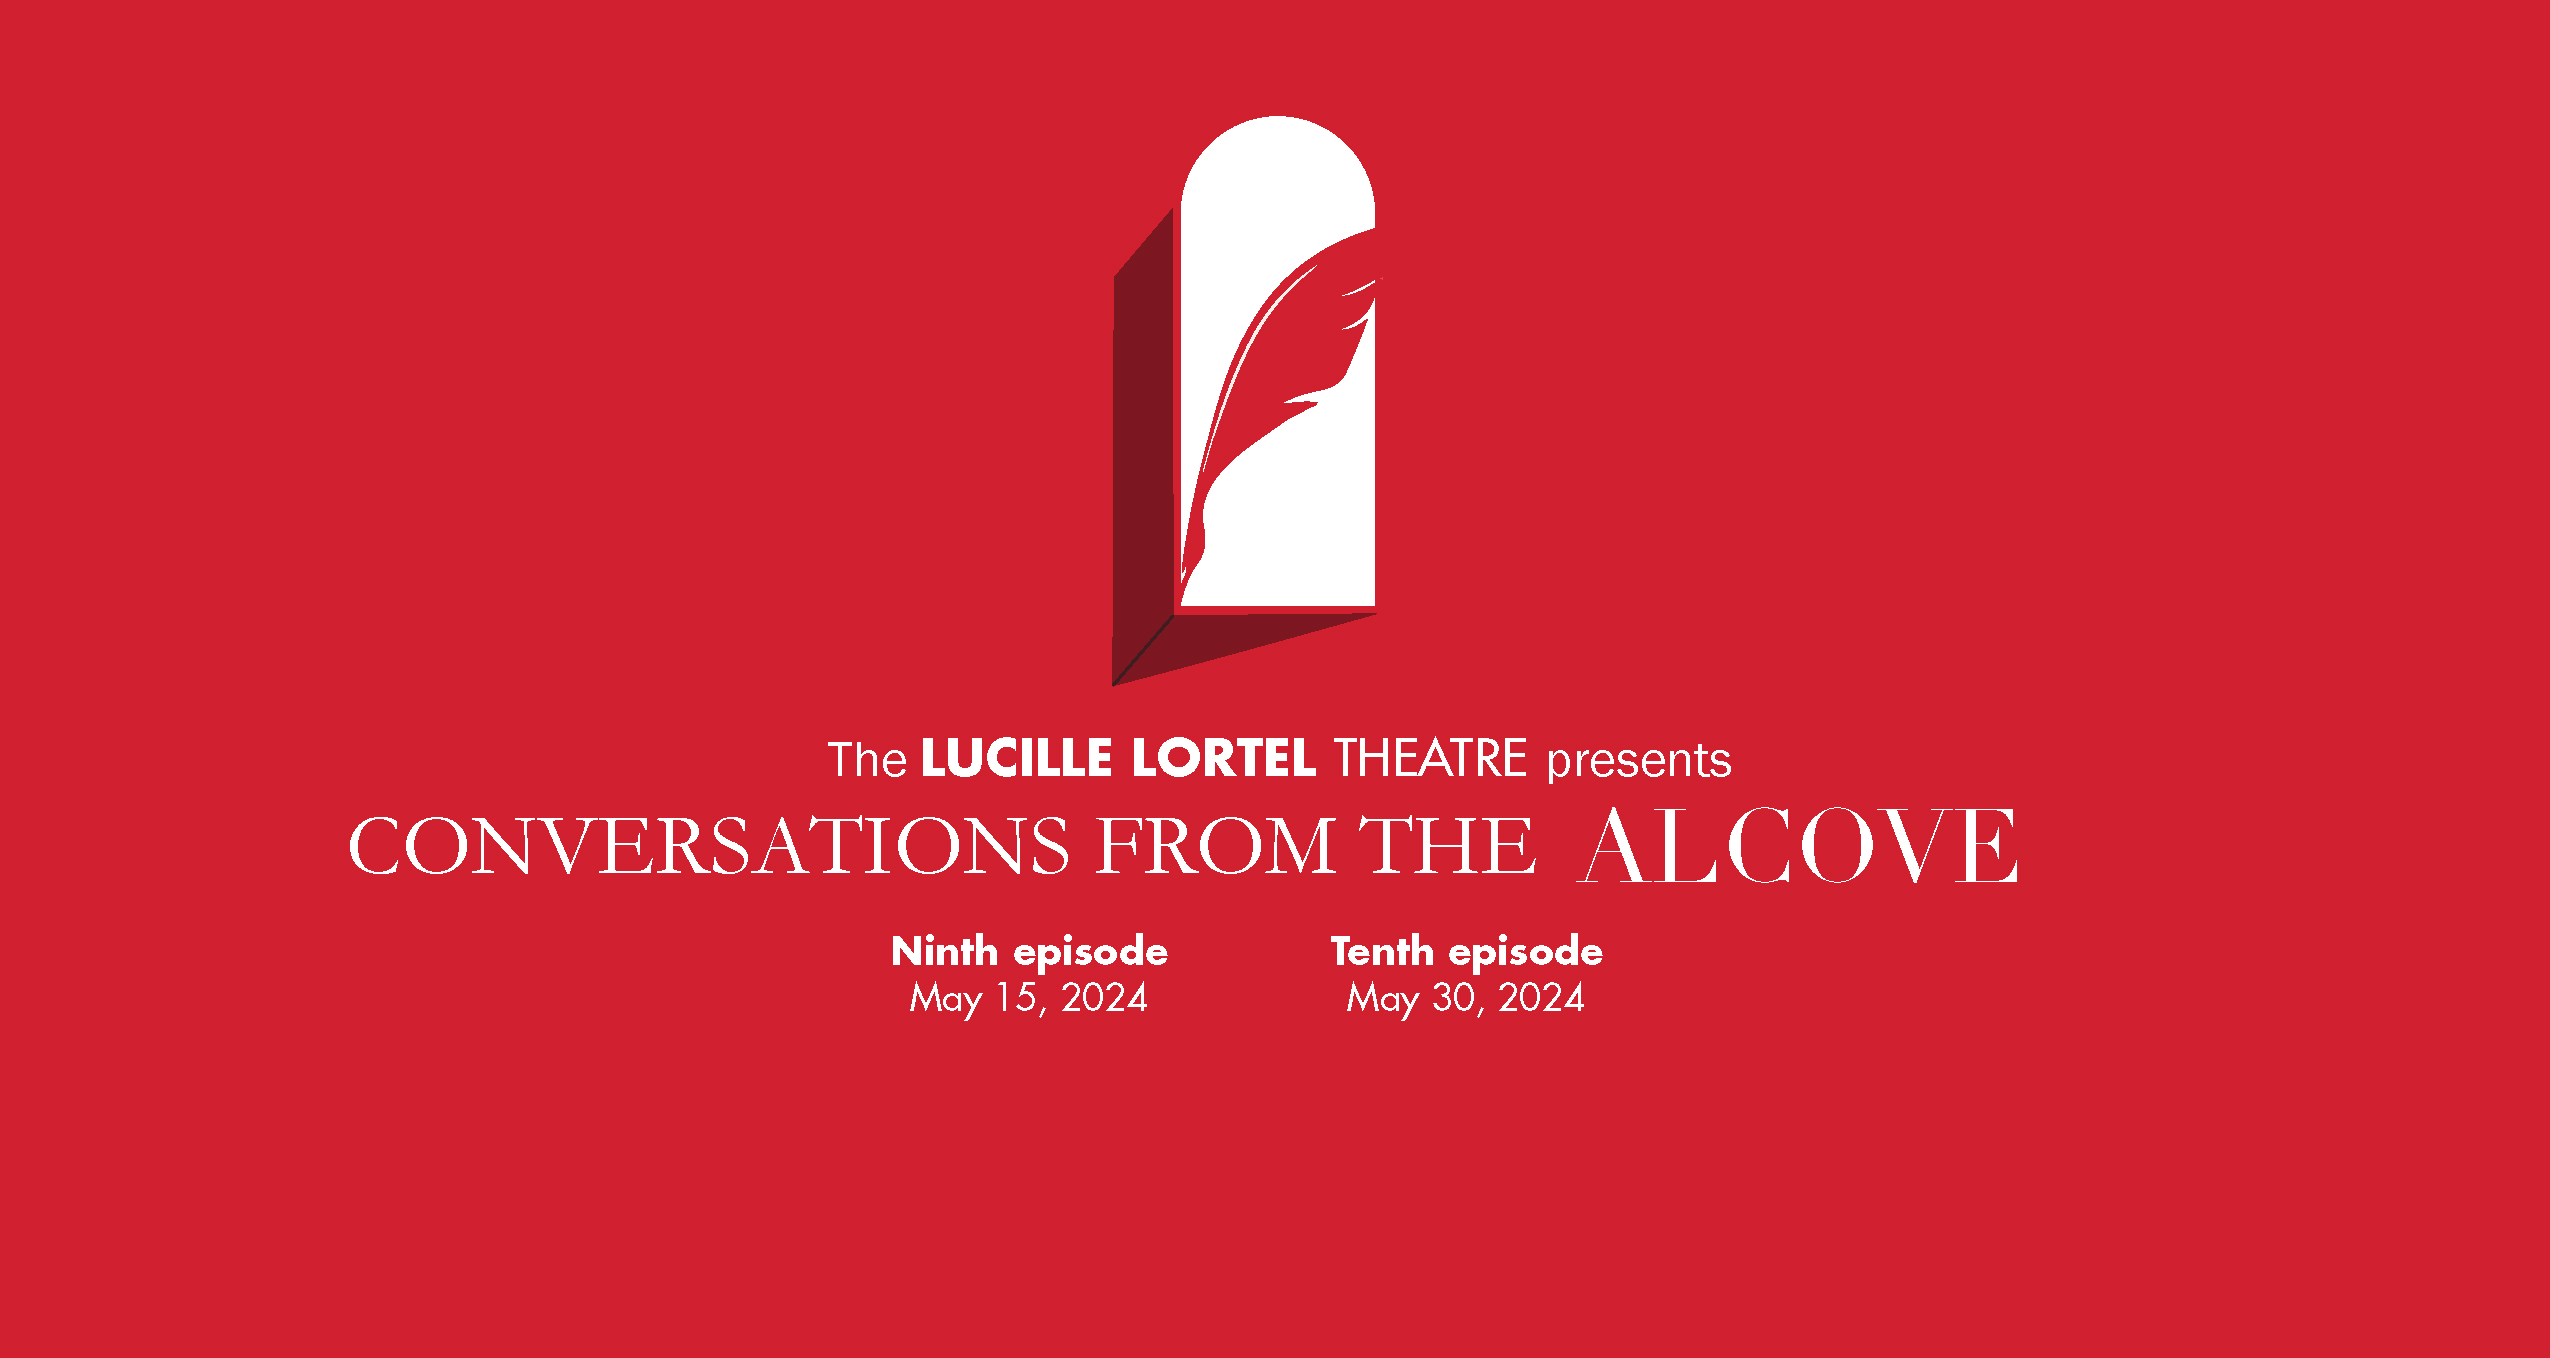 Conversations from the Alcove episode dates for May